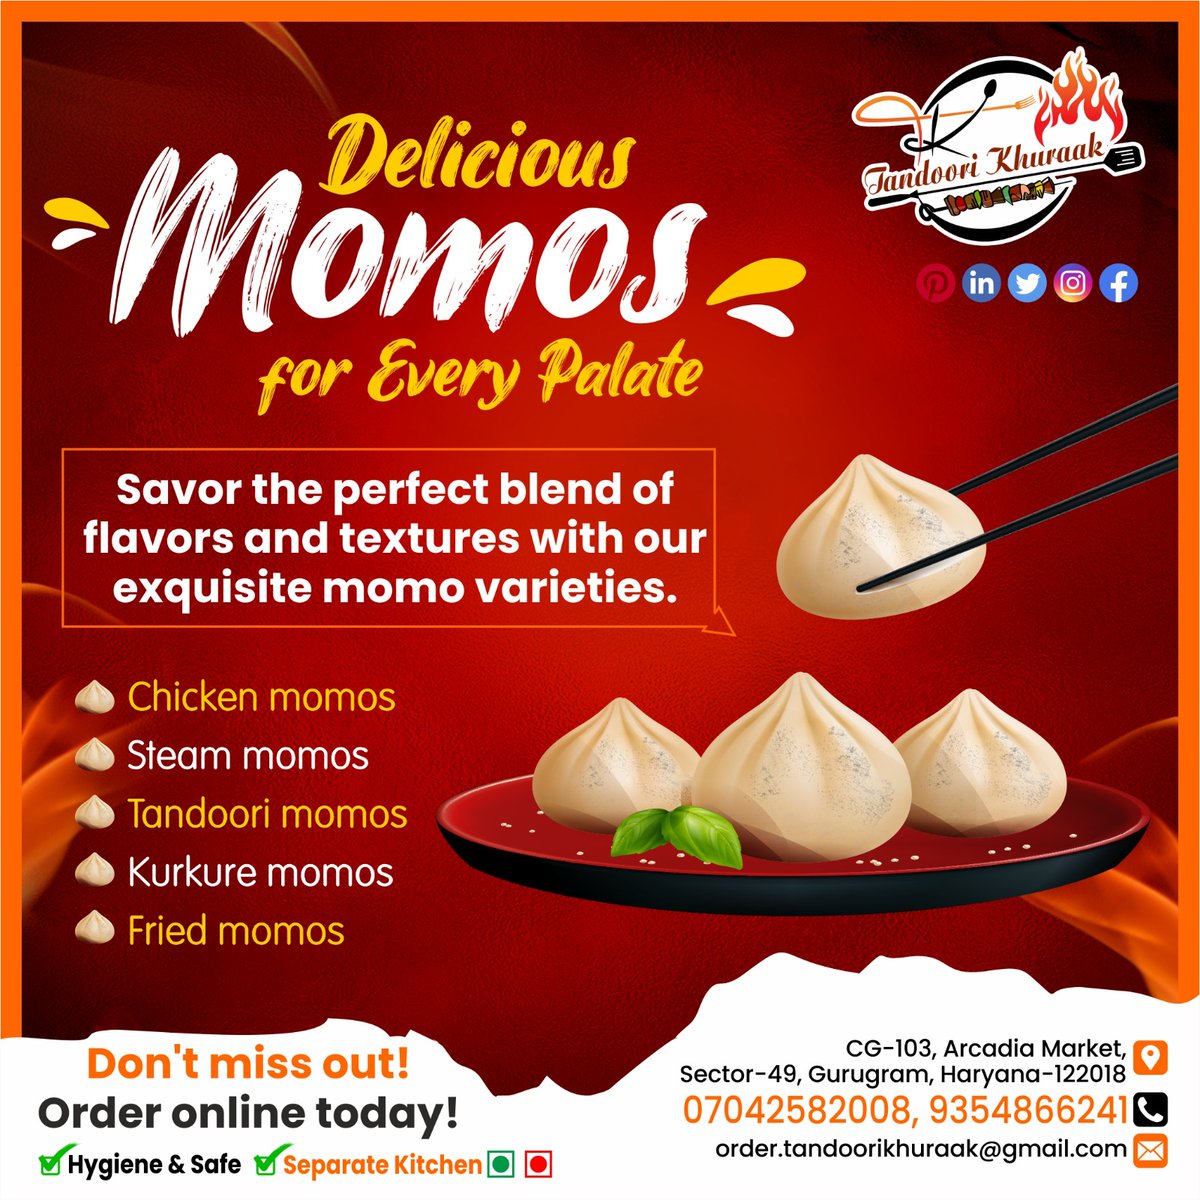 Delicious #momos for Every Palate 'Savor the perfect blend of flavors and texture with our exquisite momo varieties'.

#chickenmomos 
#steamomos 
#tandoorimomos 
#kurkuremomos 
#friedmomos 

Don't miss out! Order Online Today!

Call Now: 7042582008
Location: Gurgaon Sector-49